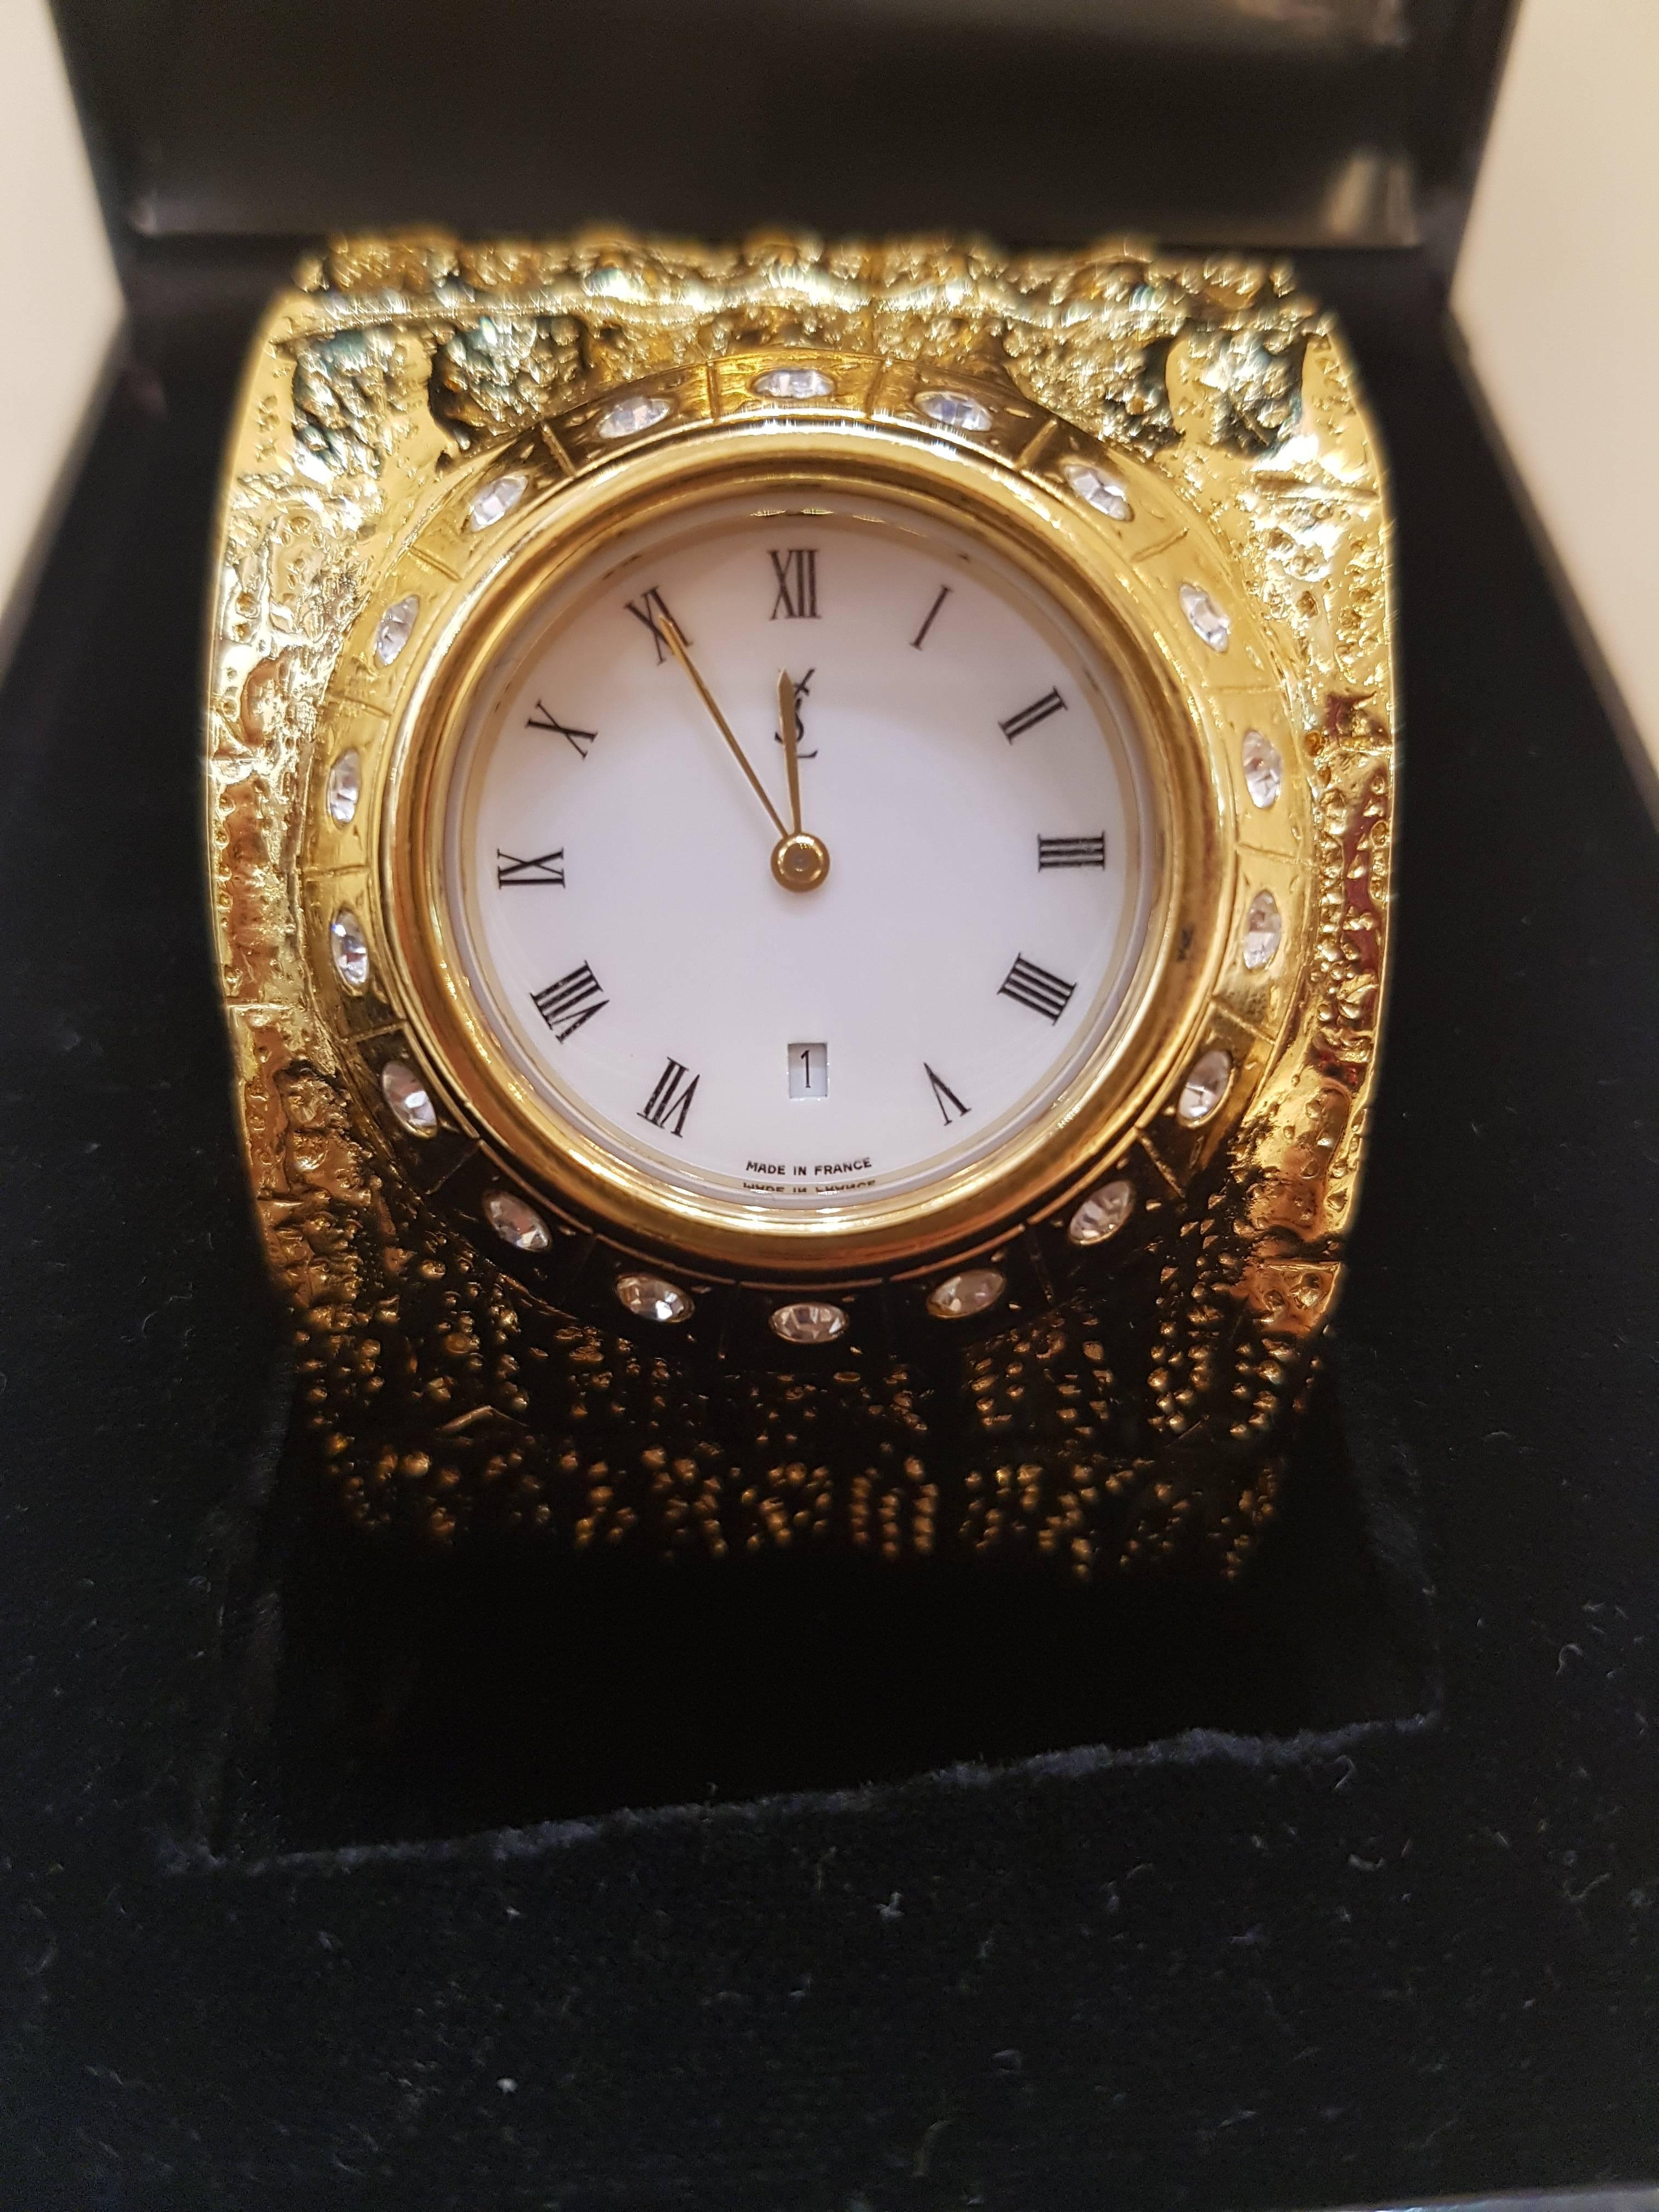 1990s Yves Saint Laurent Collection gold tone watch
Gold tone crystal stones 